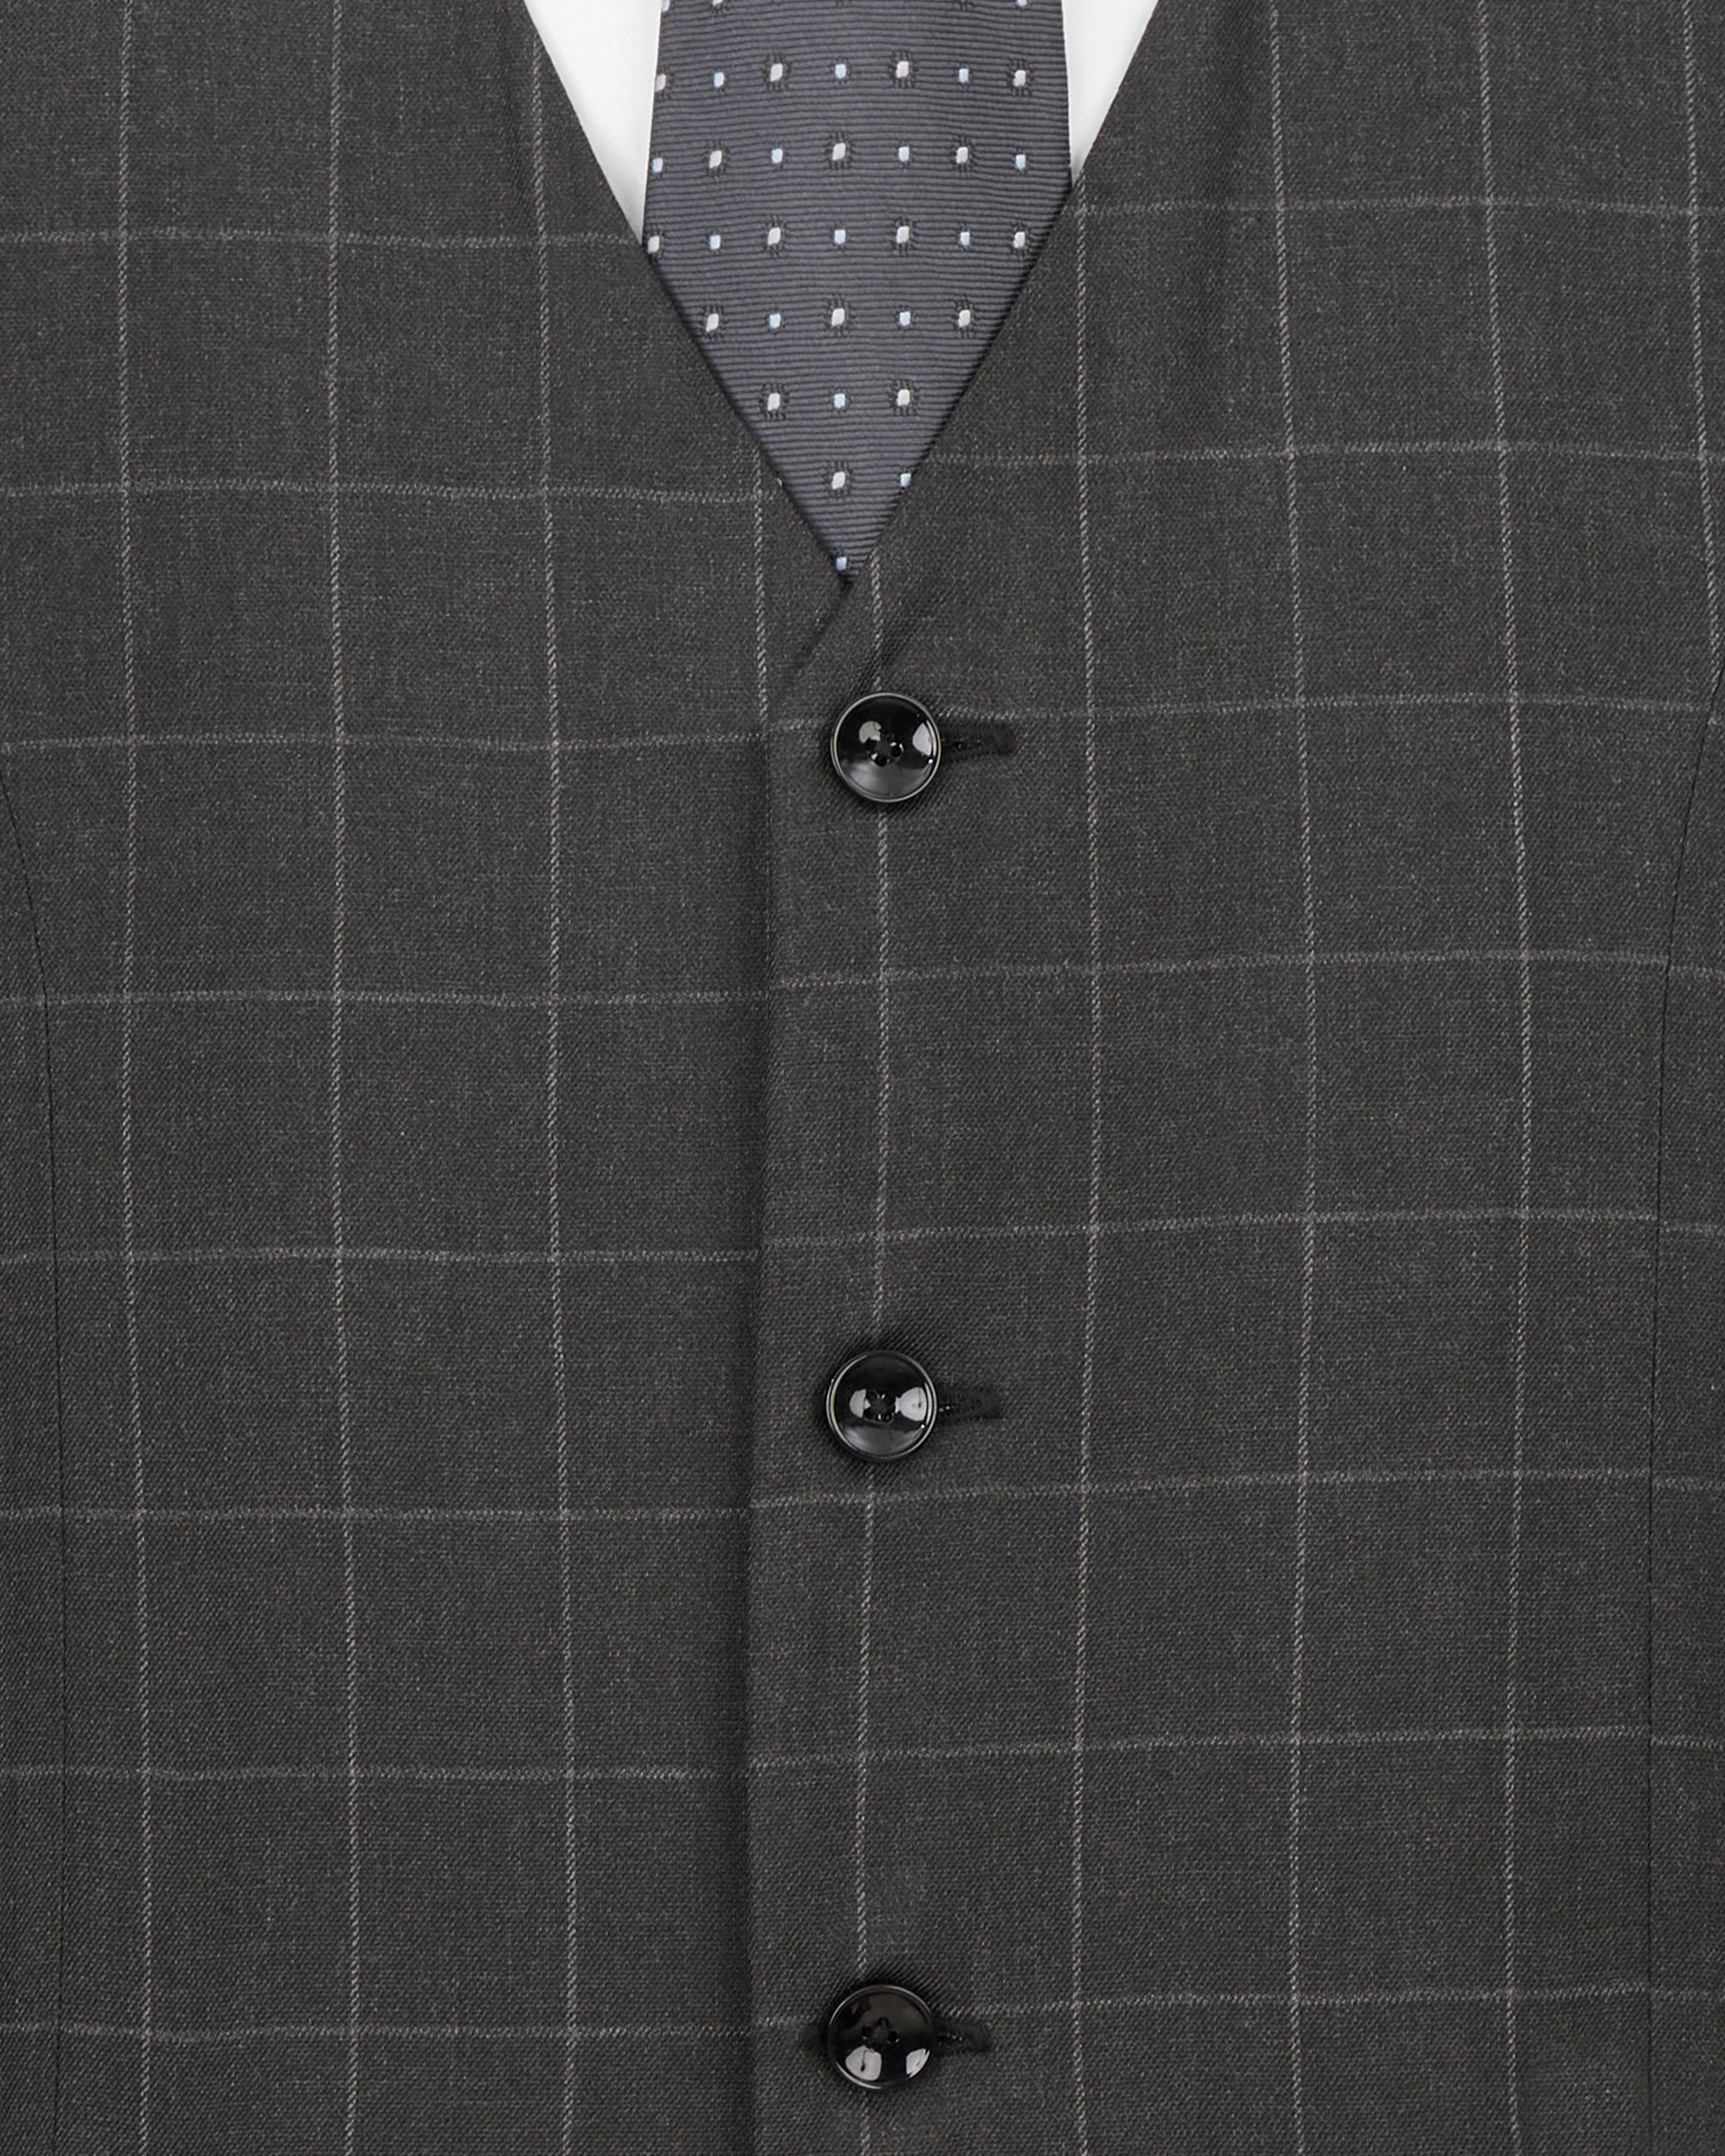 Charcoal Gray Windowpane Single Breasted Suit ST2473-SB-36, ST2473-SB-38, ST2473-SB-40, ST2473-SB-42, ST2473-SB-44, ST2473-SB-46, ST2473-SB-48, ST2473-SB-50, ST2473-SB-52, ST2473-SB-54, ST2473-SB-56, ST2473-SB-58, ST2473-SB-60